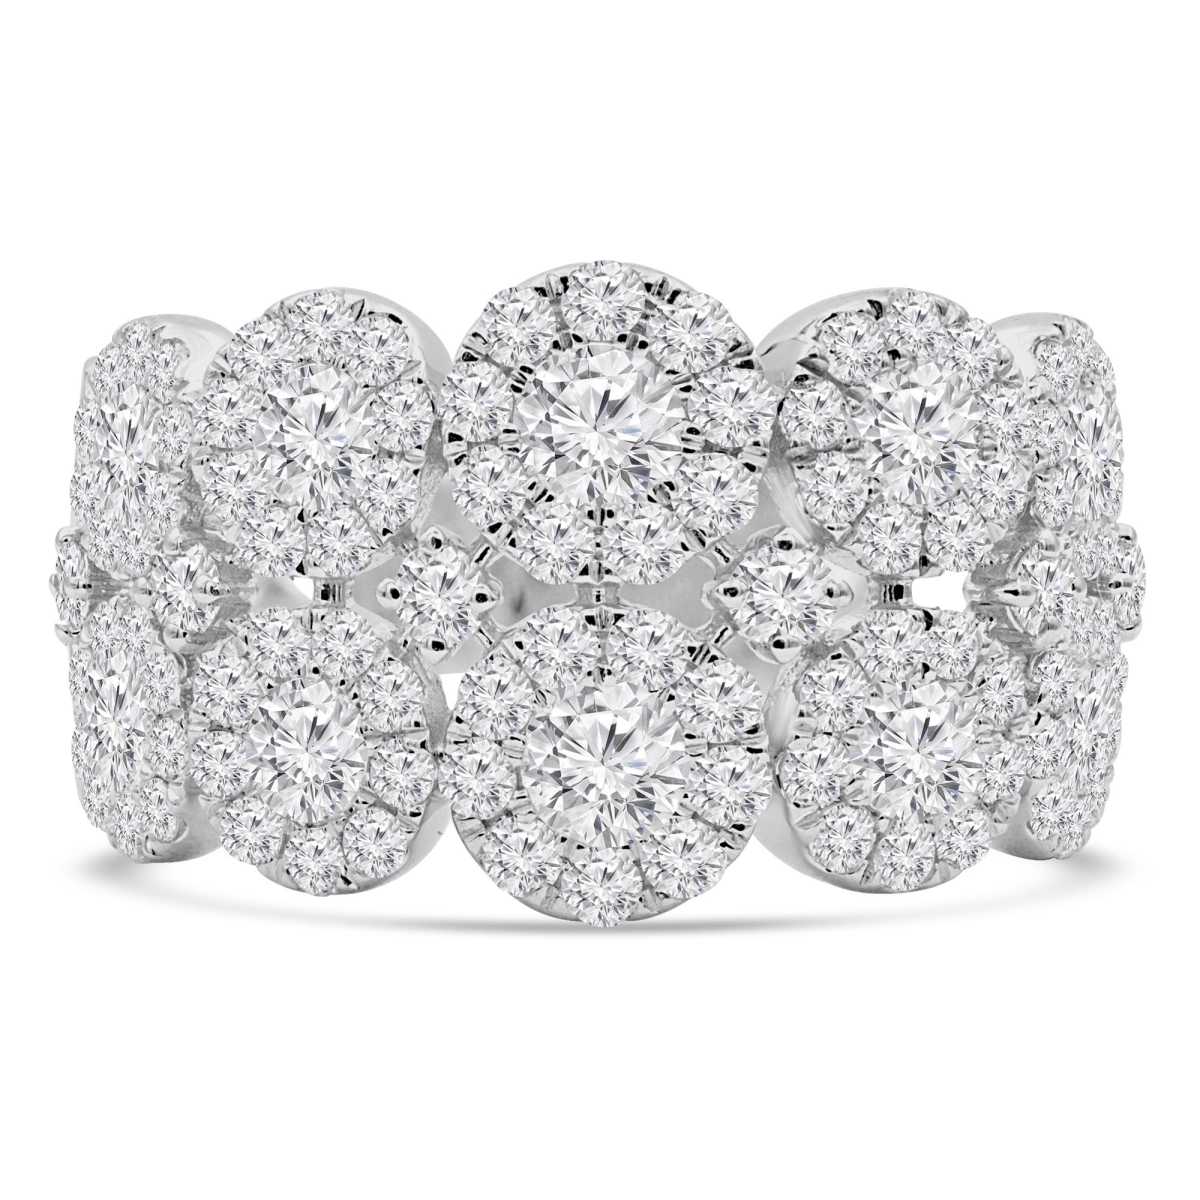 Majesty Diamonds MDR220004-P 1.8 CTW Round Diamond Halo Cluster Cocktail Ring in 18K White Gold